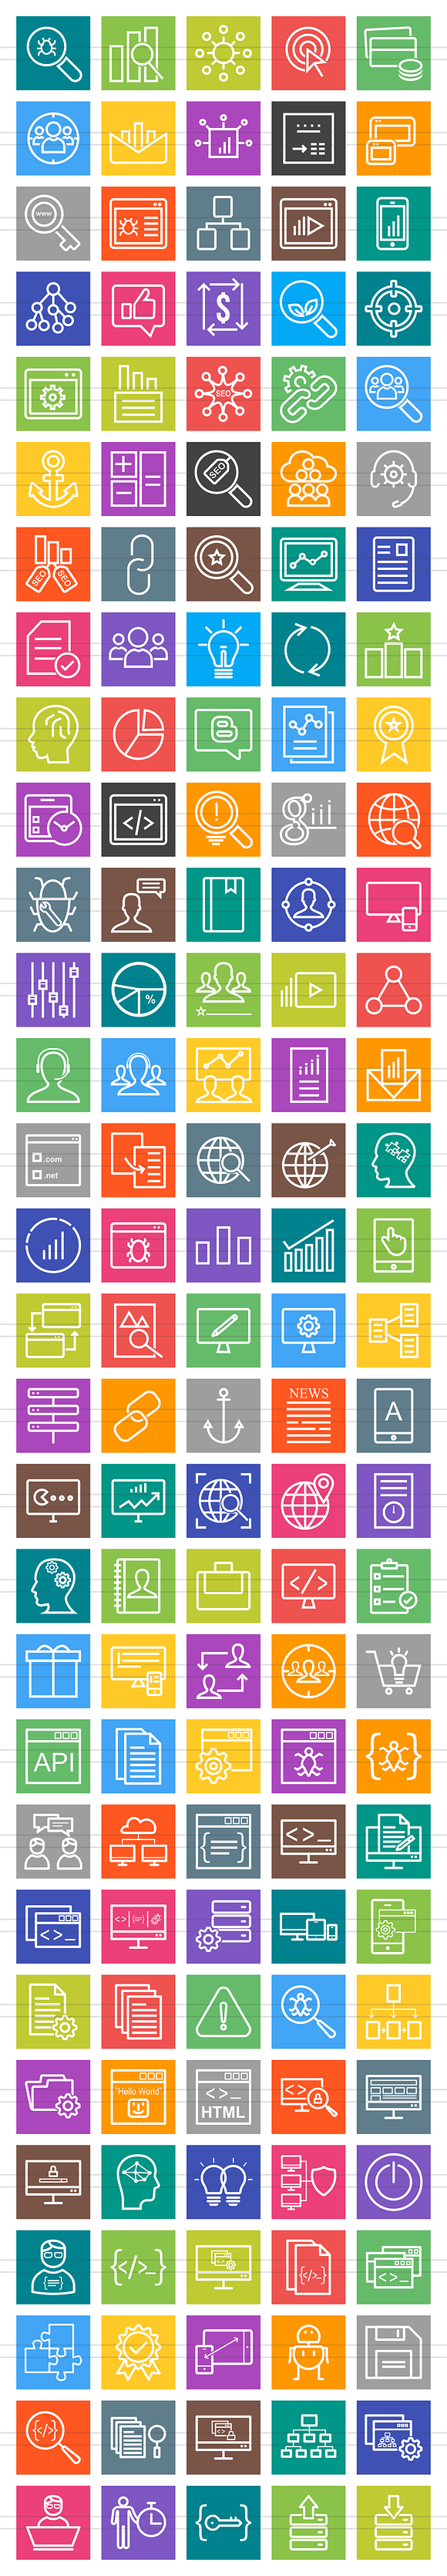 150 SEO & Development Line Icons in Graphics - product preview 1